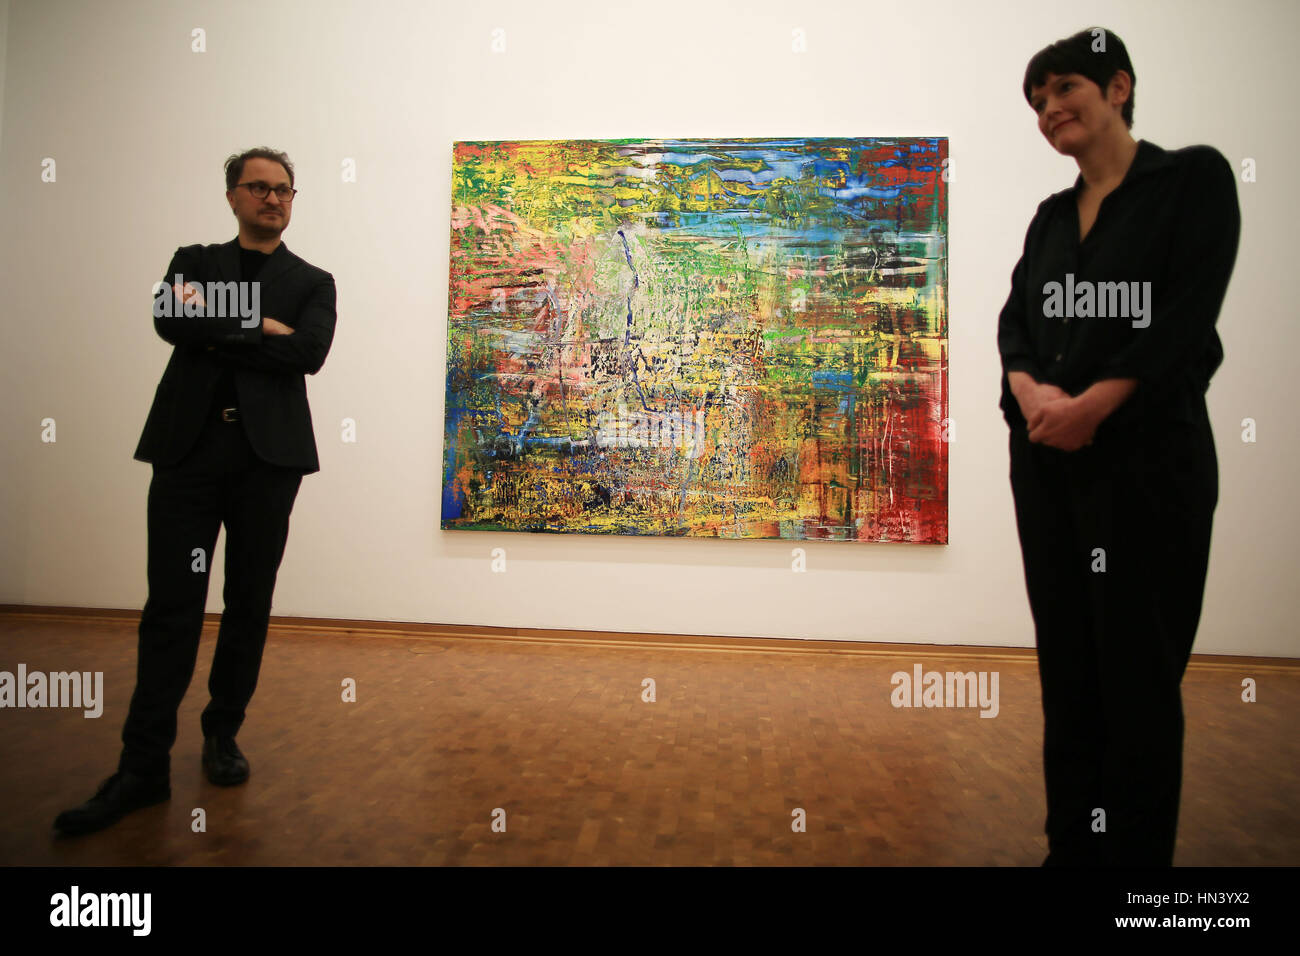 Cologne, Germany. 7th Feb, 2017. The curator Rita Kersting and the director of the museum Ludwig Yilmaz Dziewior (L) speak in front of the painting 'Abstraktes Bild' from Gerhard Richter in Cologne, Germany, 7 February 2017. The exhibition 'New Pictures' for Richter's 85th birthday will be opened on the 9 February 2017 at the Museum Ludwig. Photo: Oliver Berg/dpa/Alamy Live News Stock Photo